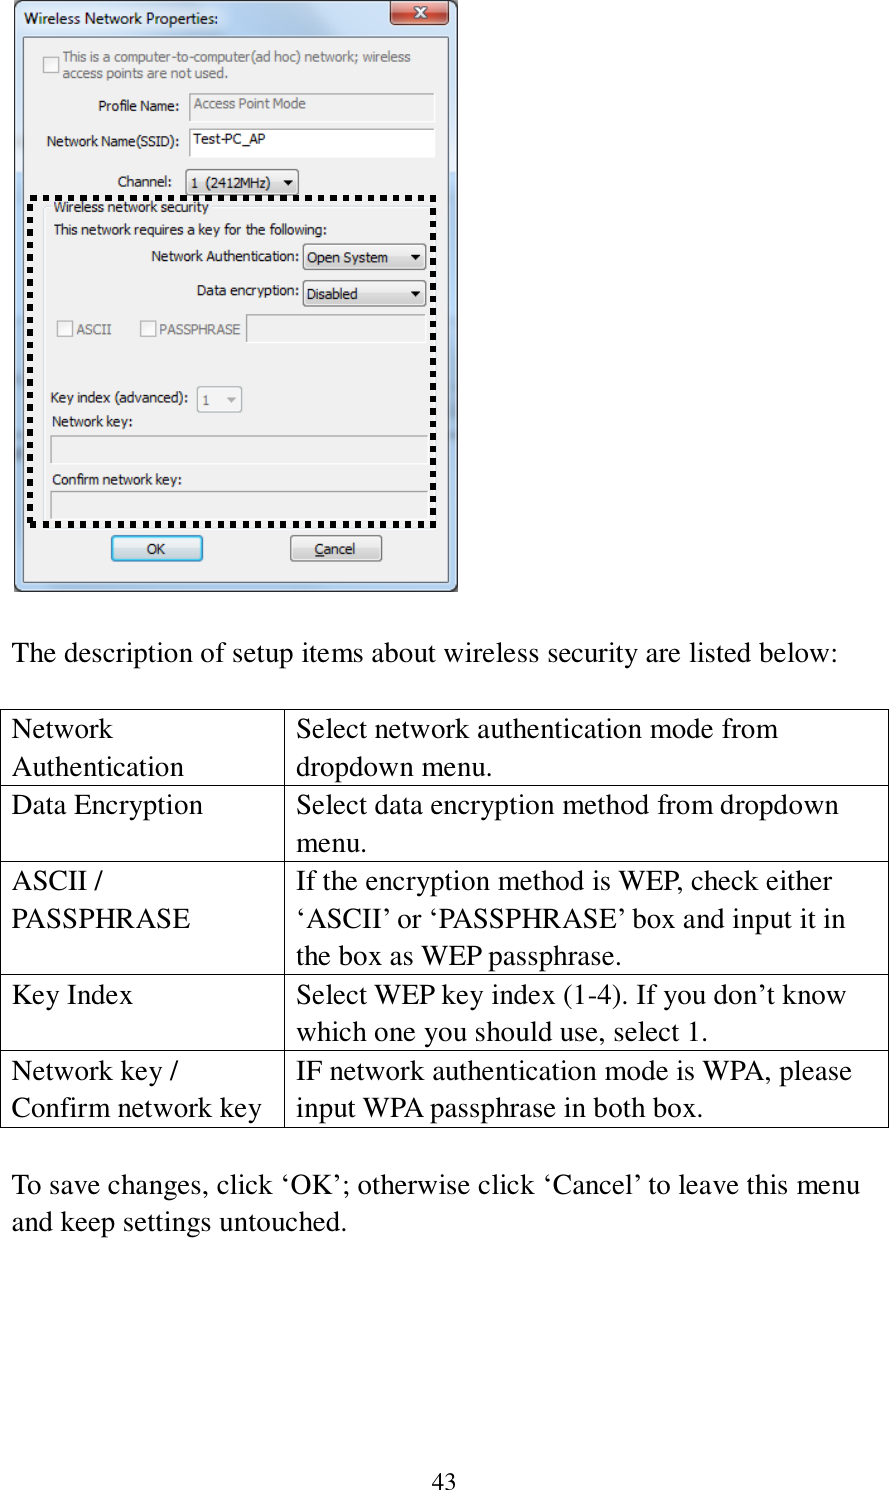  43   The description of setup items about wireless security are listed below:  Network Authentication Select network authentication mode from dropdown menu. Data Encryption Select data encryption method from dropdown menu. ASCII / PASSPHRASE If the encryption method is WEP, check either ‘ASCII’ or ‘PASSPHRASE’ box and input it in the box as WEP passphrase. Key Index Select WEP key index (1-4). If you don’t know which one you should use, select 1. Network key / Confirm network key IF network authentication mode is WPA, please input WPA passphrase in both box.  To save changes, click ‘OK’; otherwise click ‘Cancel’ to leave this menu and keep settings untouched.      